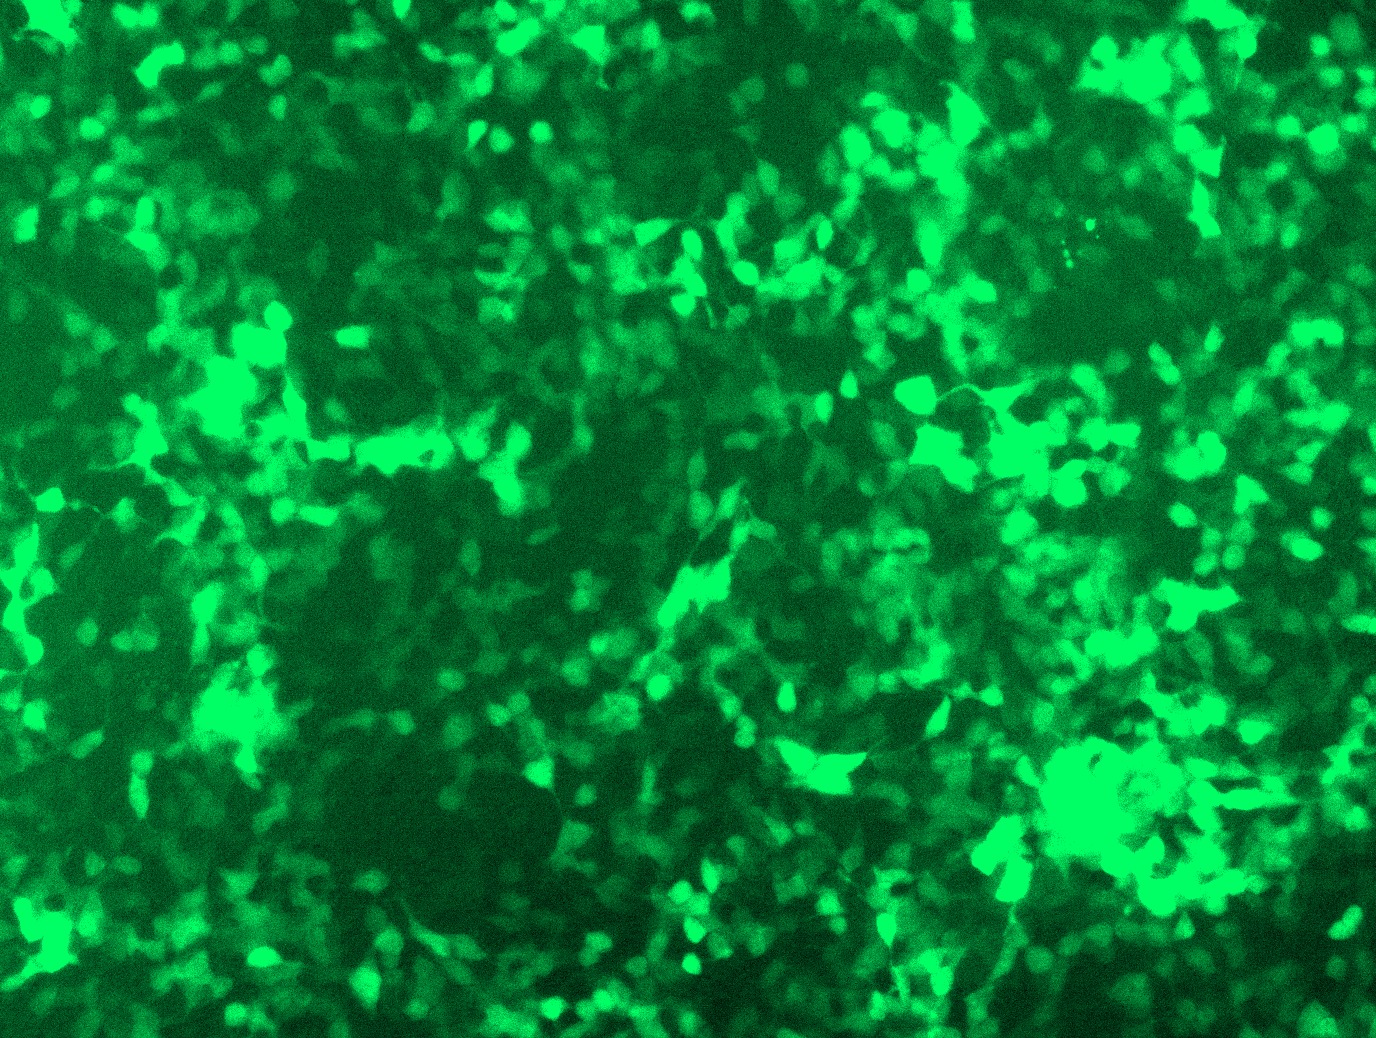 GFP signal was observed under microscope at 48 hours after transduction of TL509695A virus into HEK293 cells. TL509695A virus was prepared using lenti-shRNA TL509695A and TR30037 packaging kit.